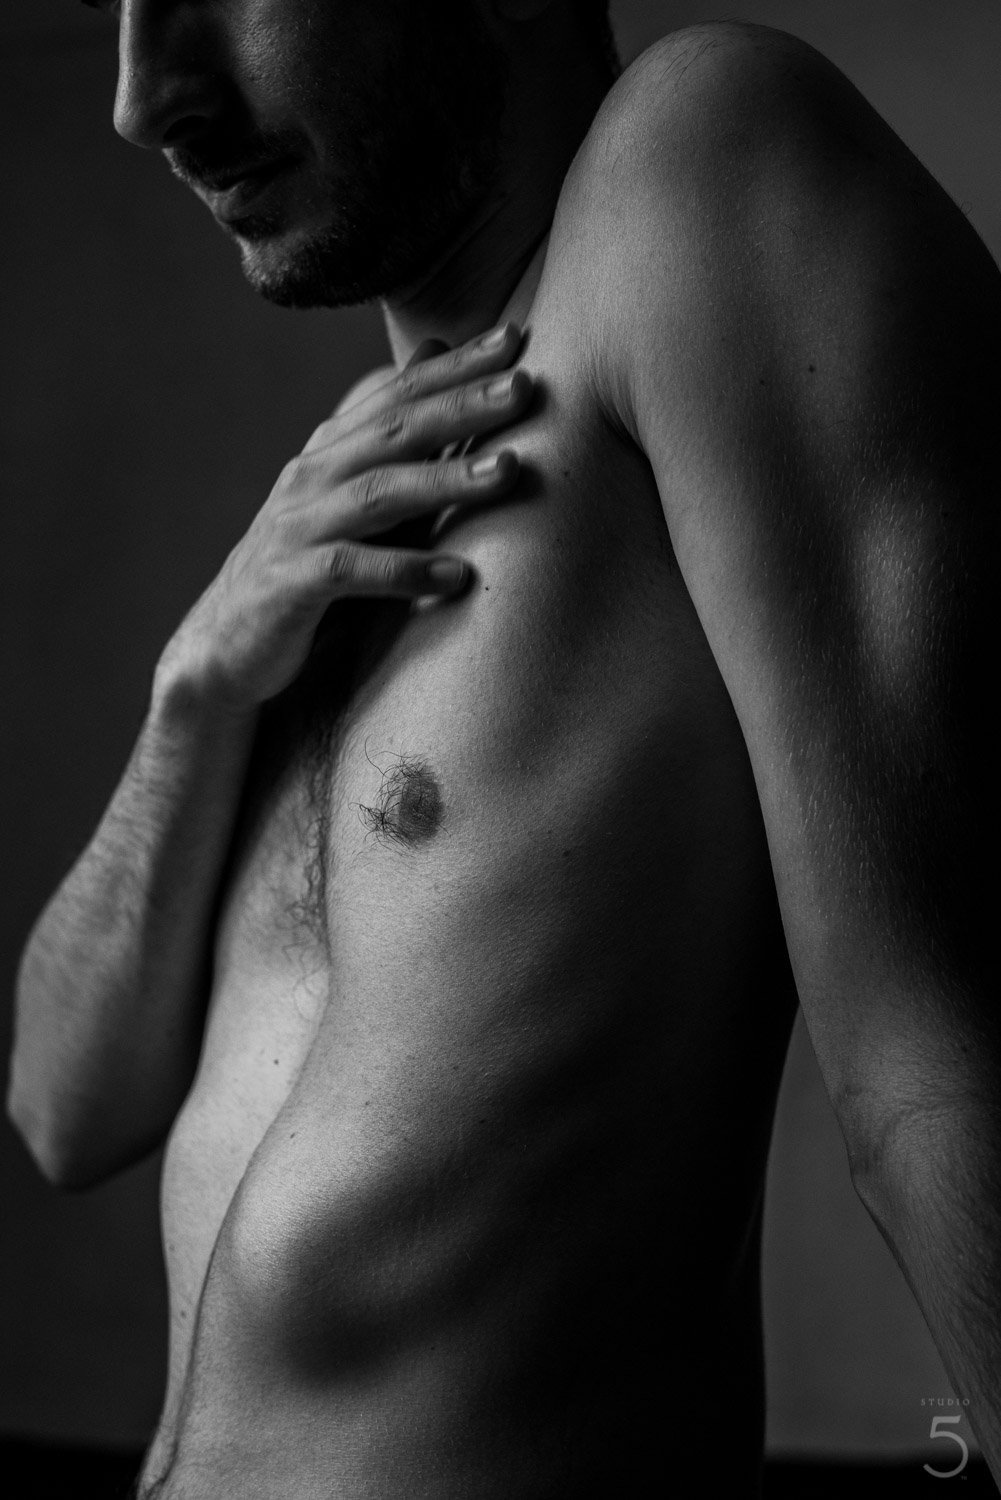 Sensual and artistic male torso in black and white, photo by Studio5th,
nude photoshoot, photoshoot de nu, nu artistique, naked men, french men, nude photography, male artistic nude, professional artist, respectful 